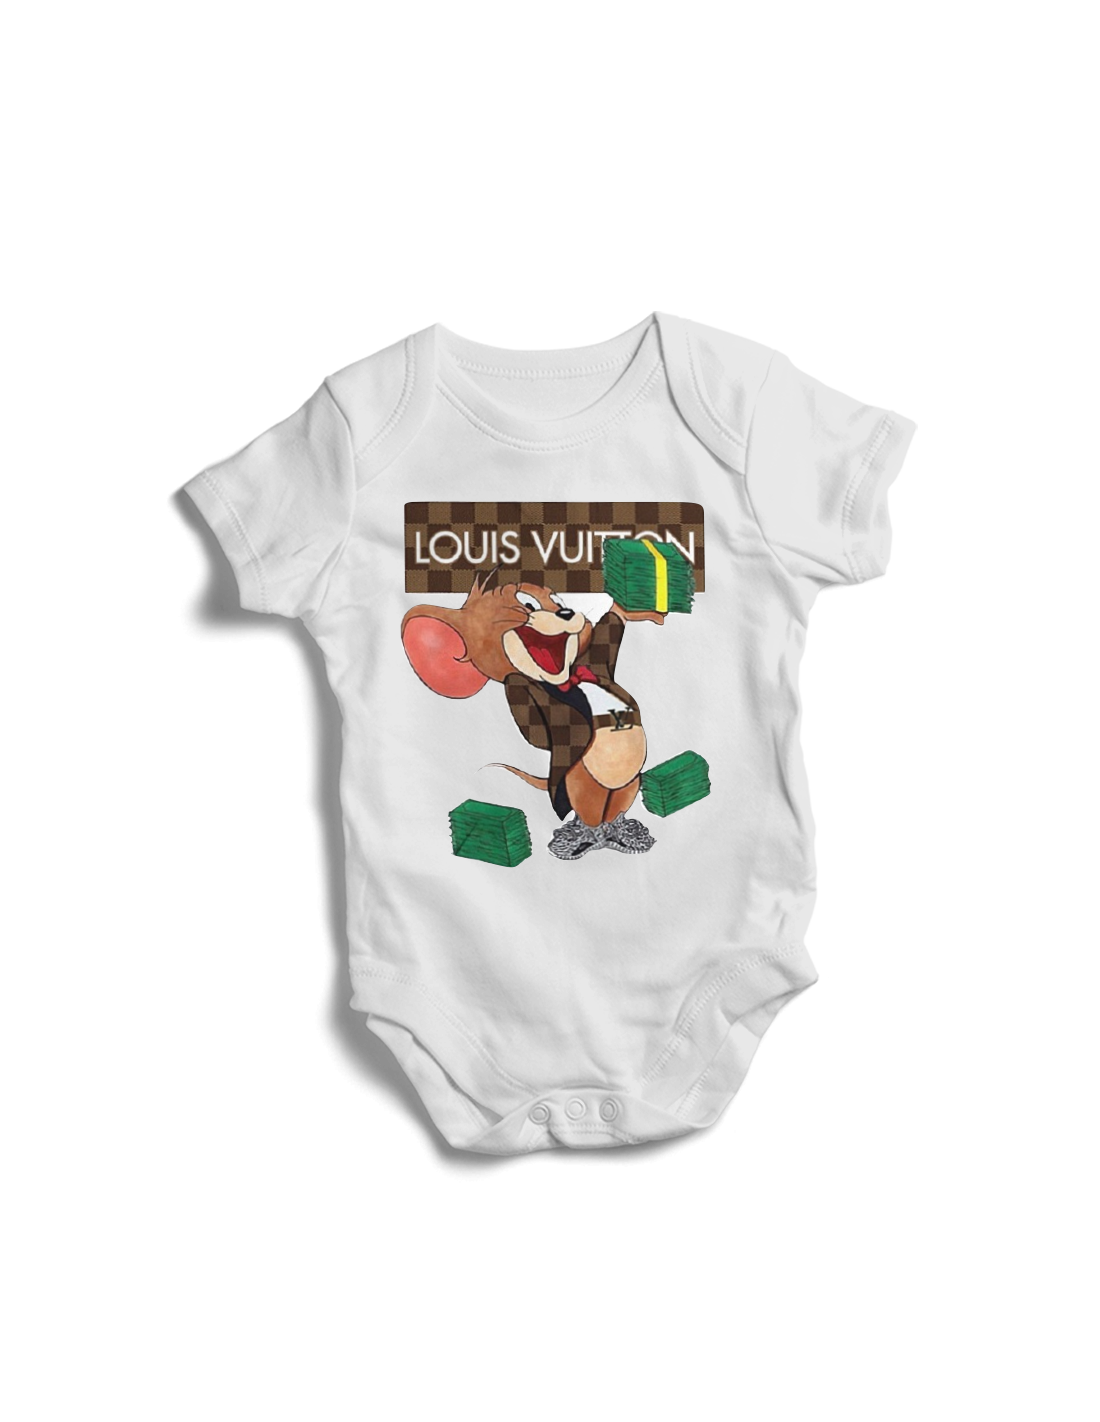 Louis Vuitton Tom Jerry baby onesies online store